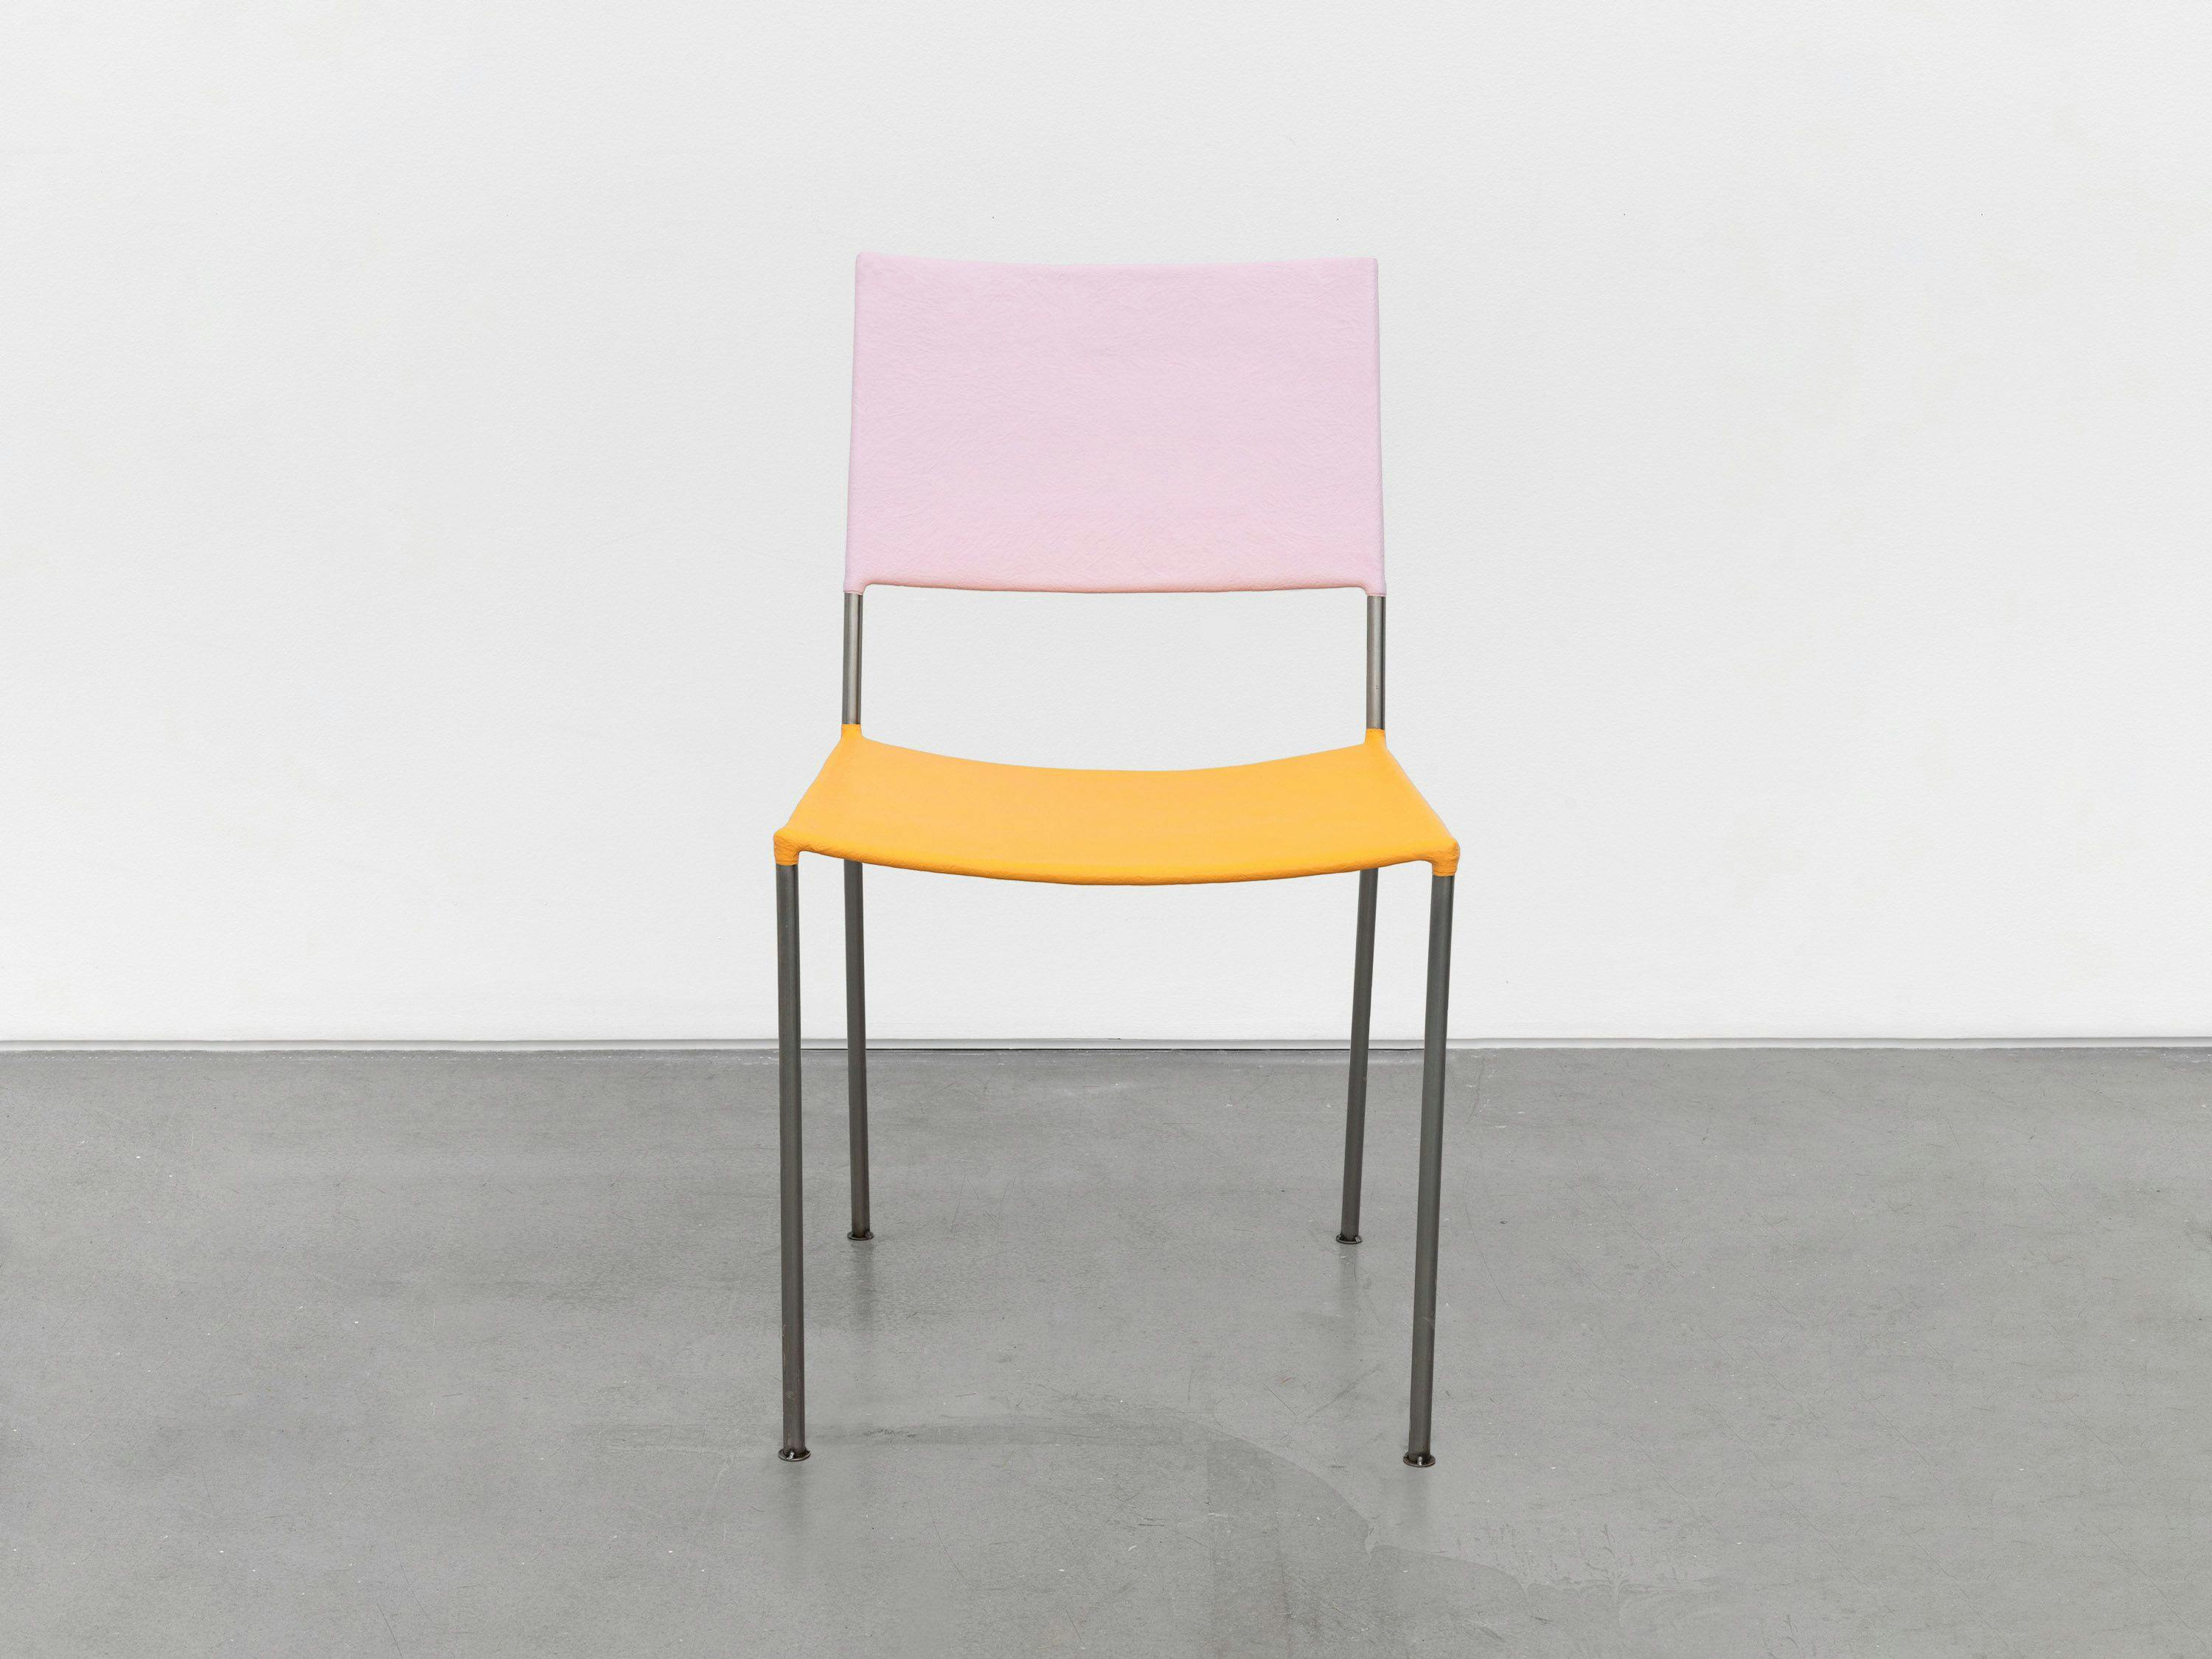 A chair by Franz West, titled Künstlerstuhl (Artist's Chair), dated in 2006 and 2022.